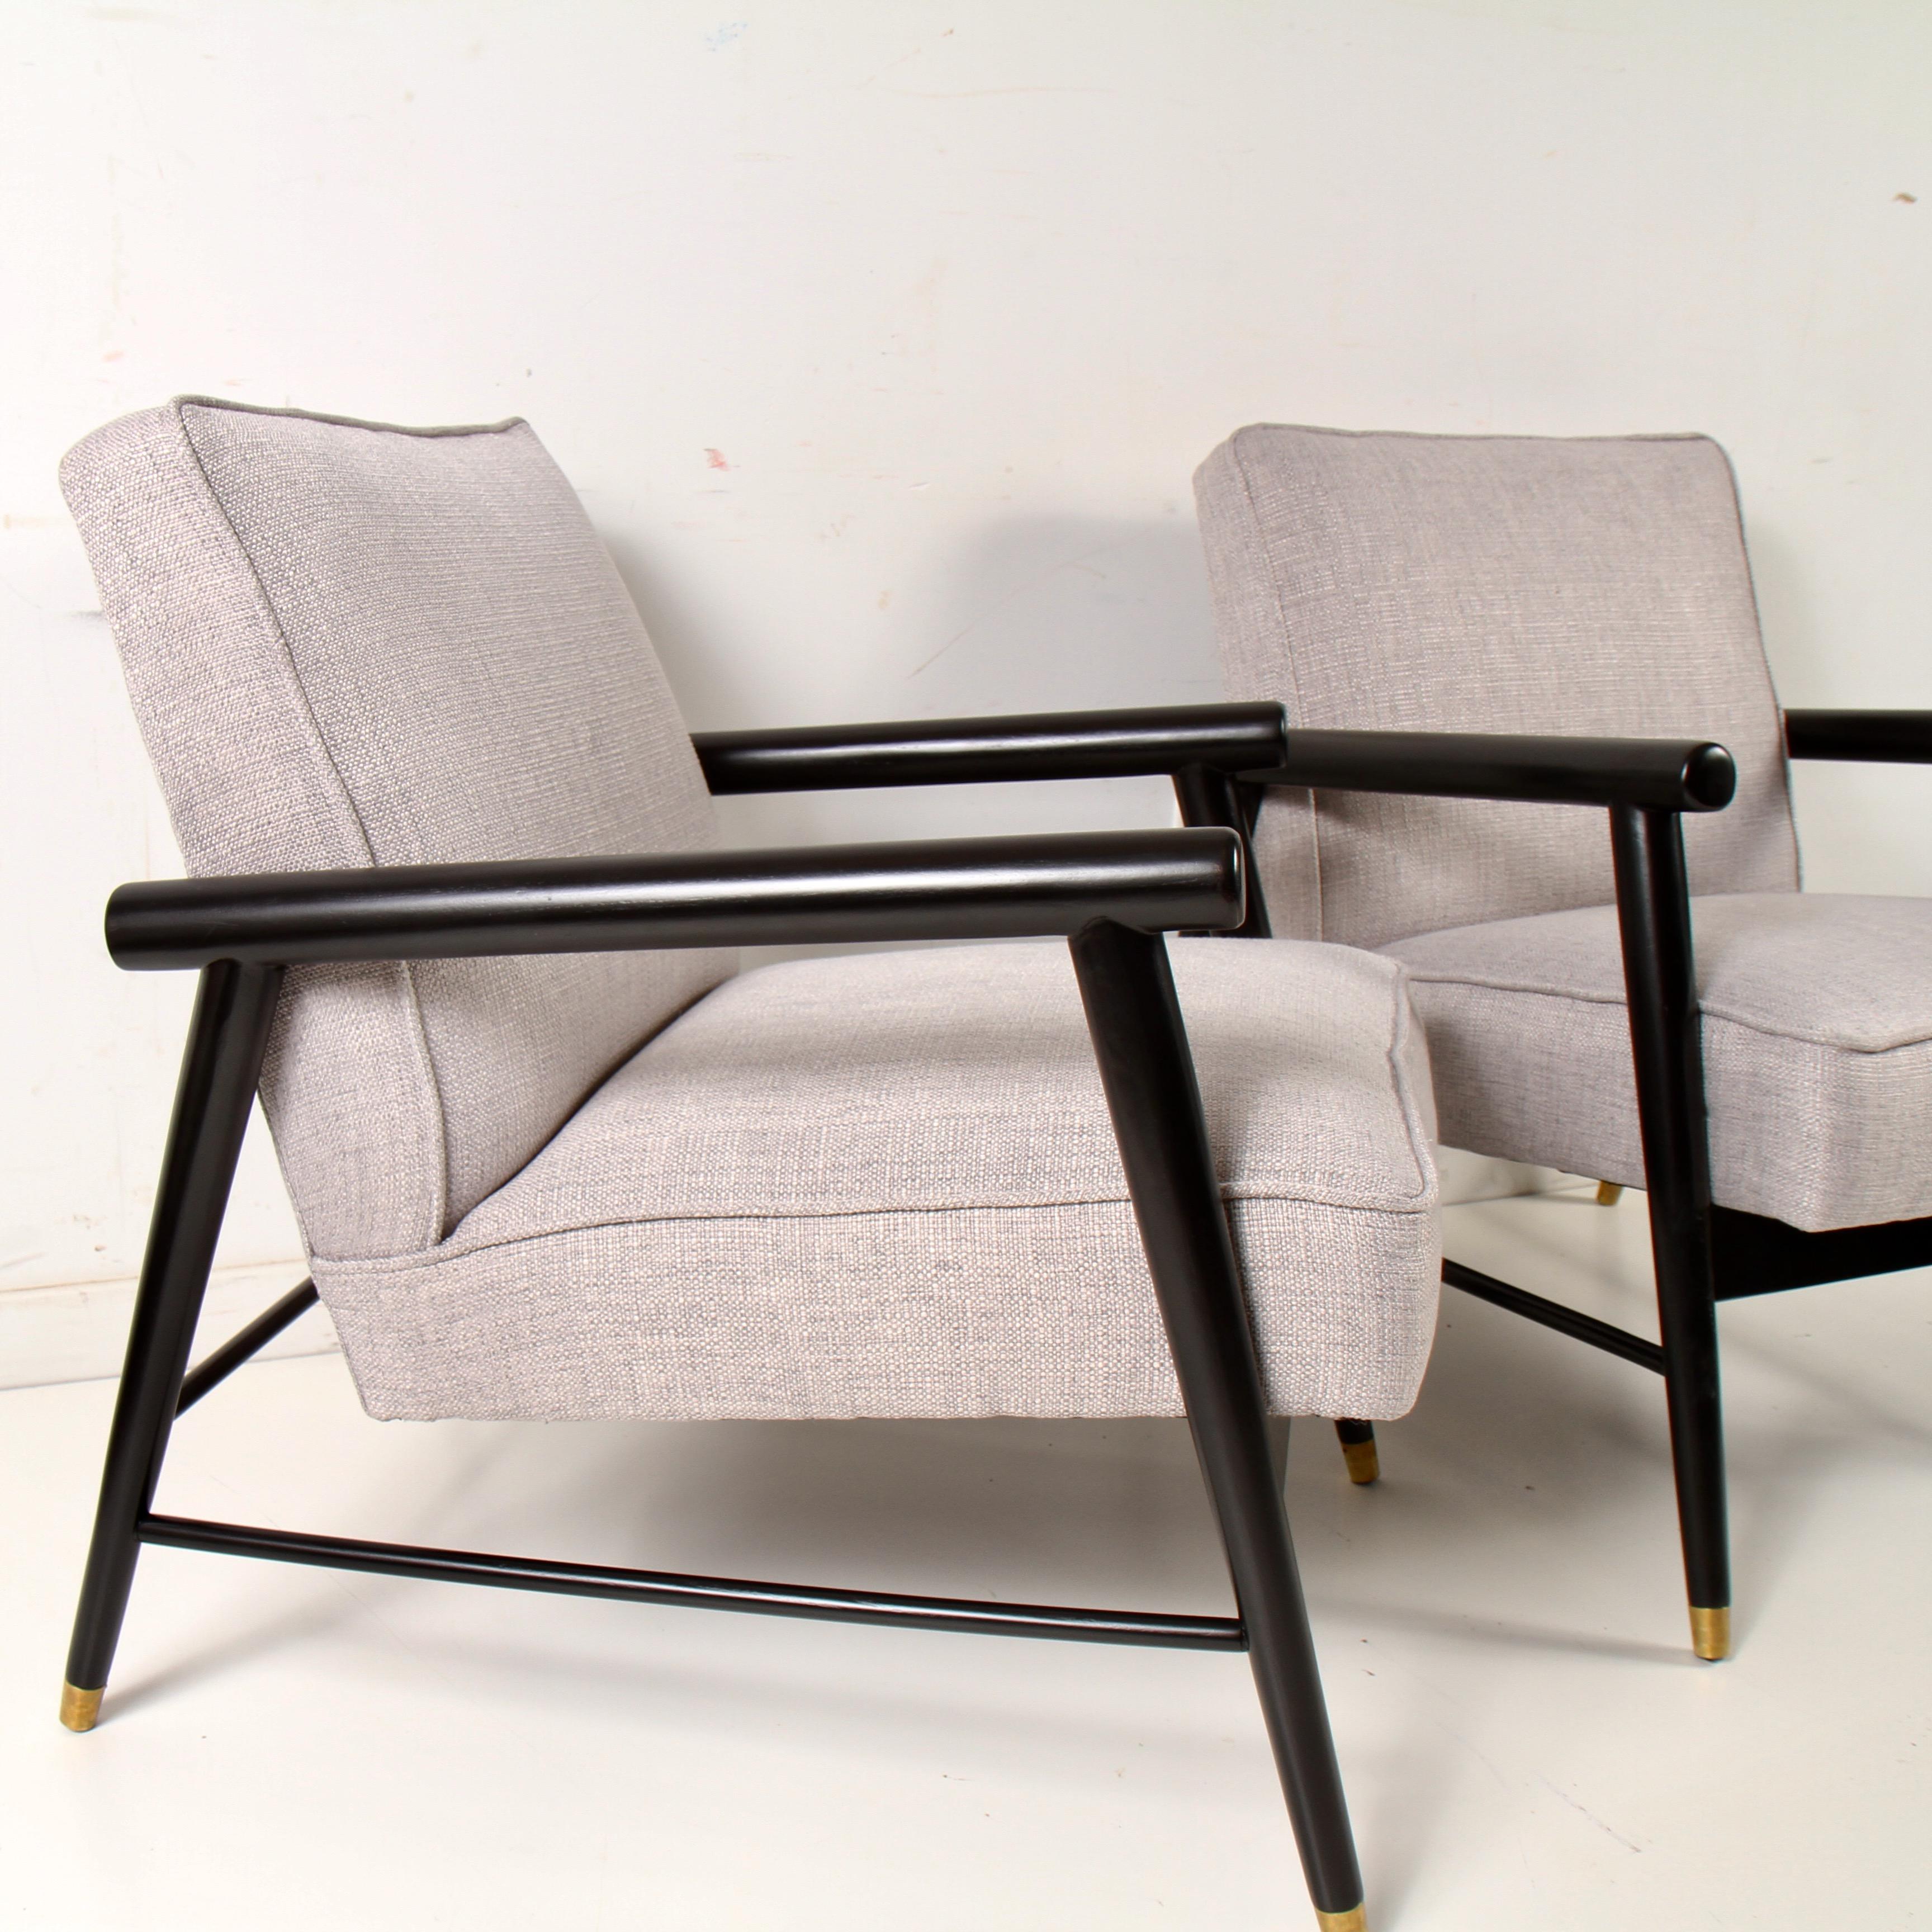 1950s era lounge chairs that have nee refinished and rebuilt from the ground up. Chairs have nee recovered in a light gray linen and the walnut frame has been refinished to its original ebony. They are well made, yet relatively easy to move. Great